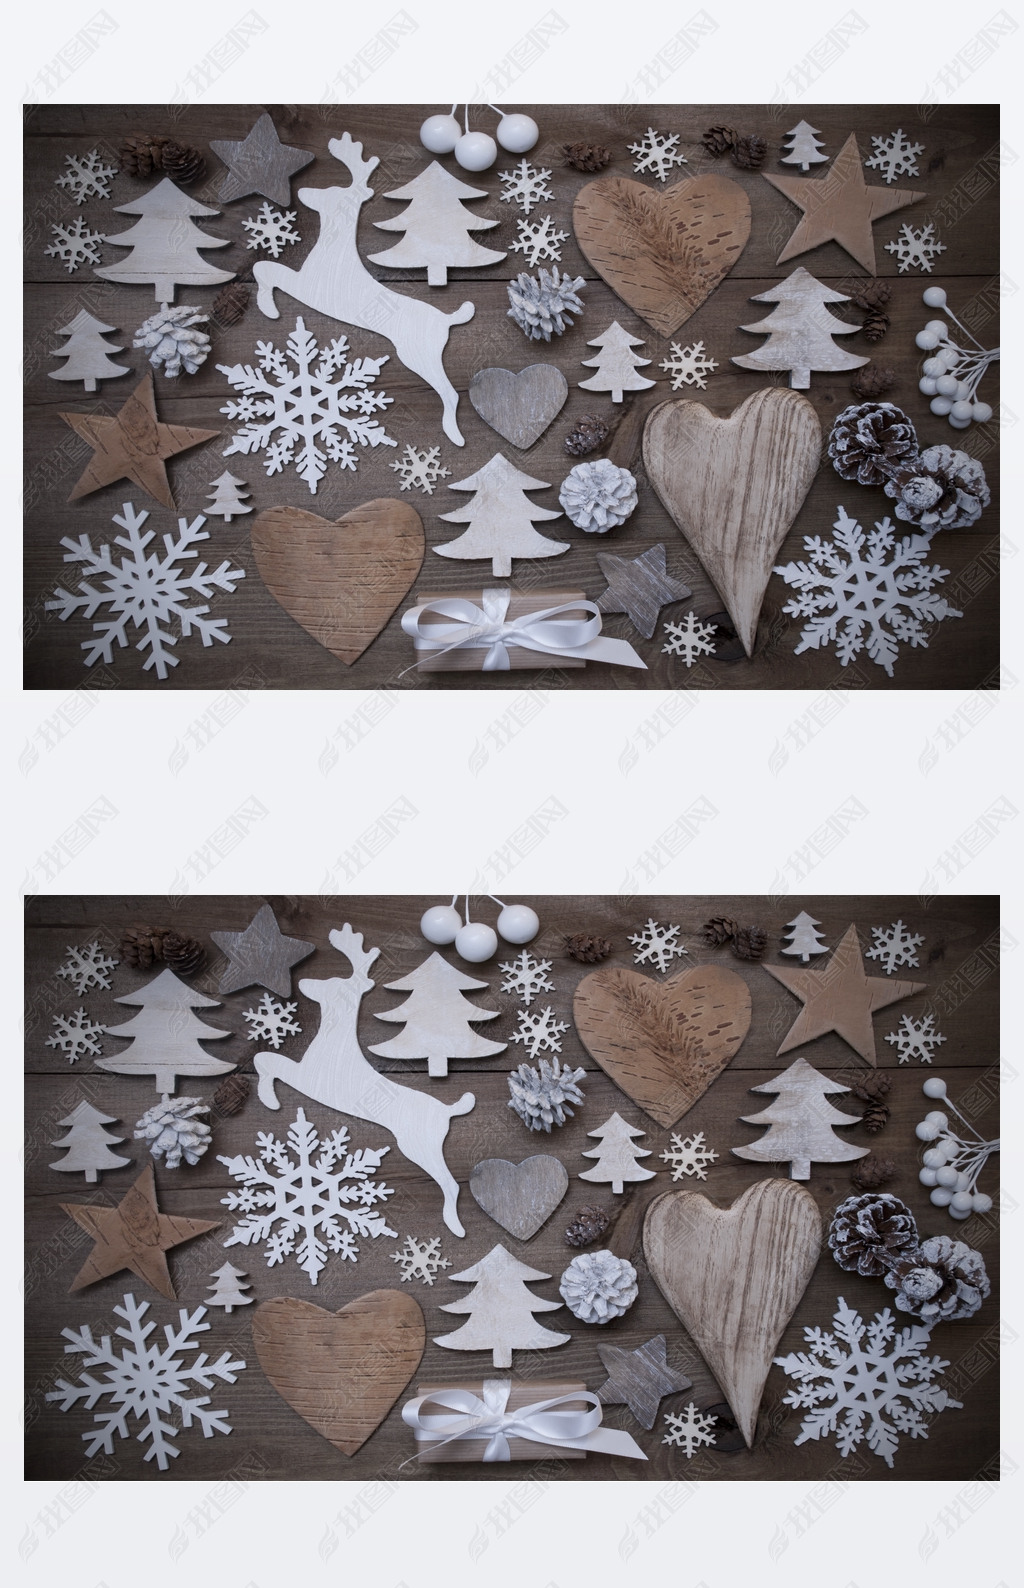 Many Christmas Decoration,Heart,Snowflakes,Star,Present,Reindeer